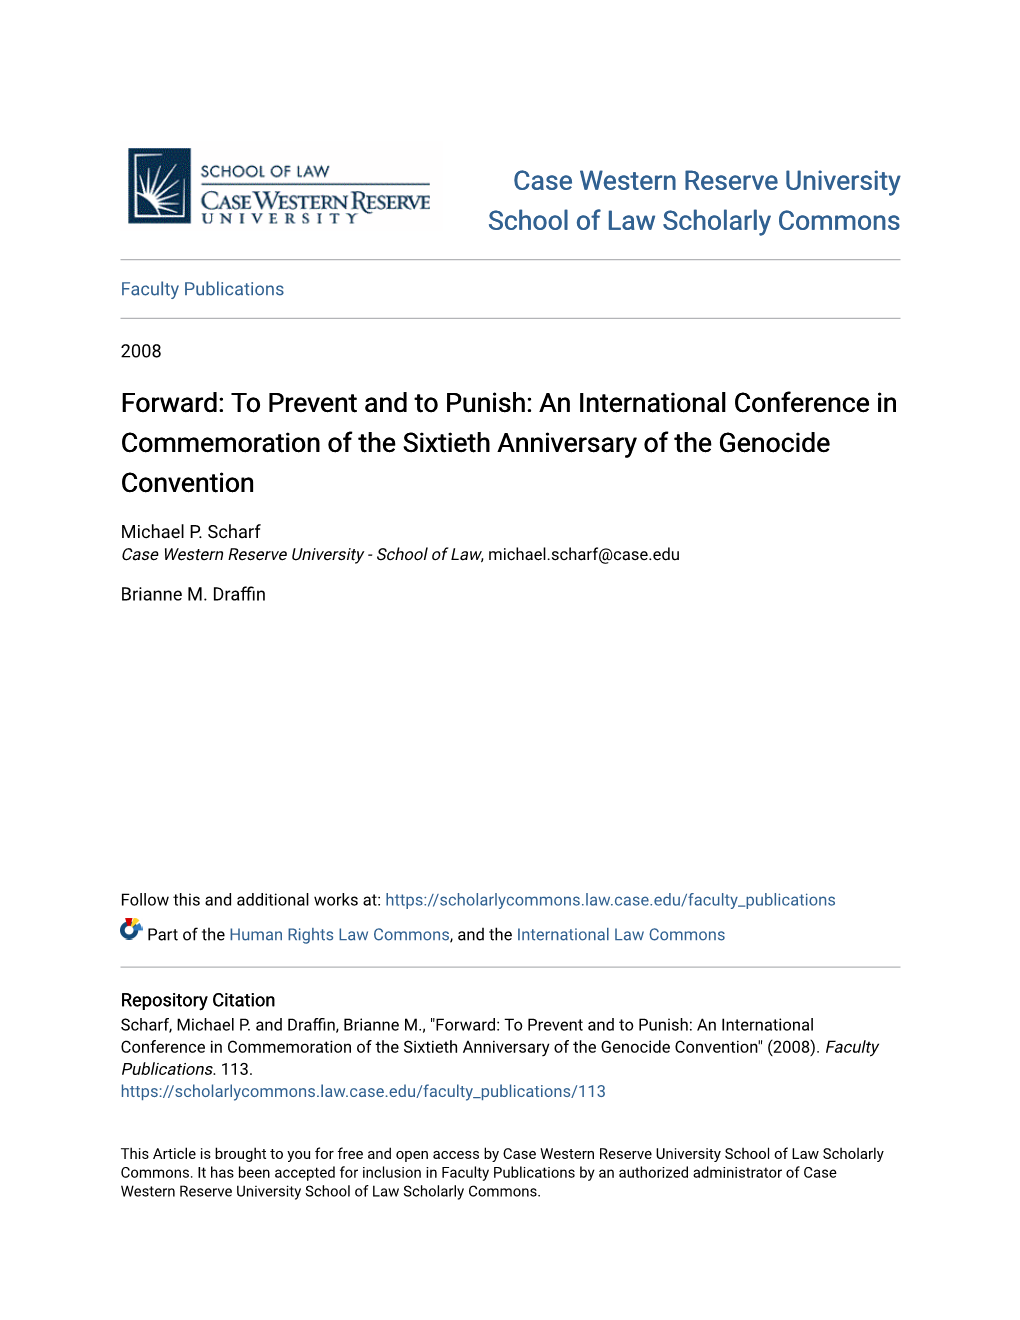 Forward: to Prevent and to Punish: an International Conference in Commemoration of the Sixtieth Anniversary of the Genocide Convention